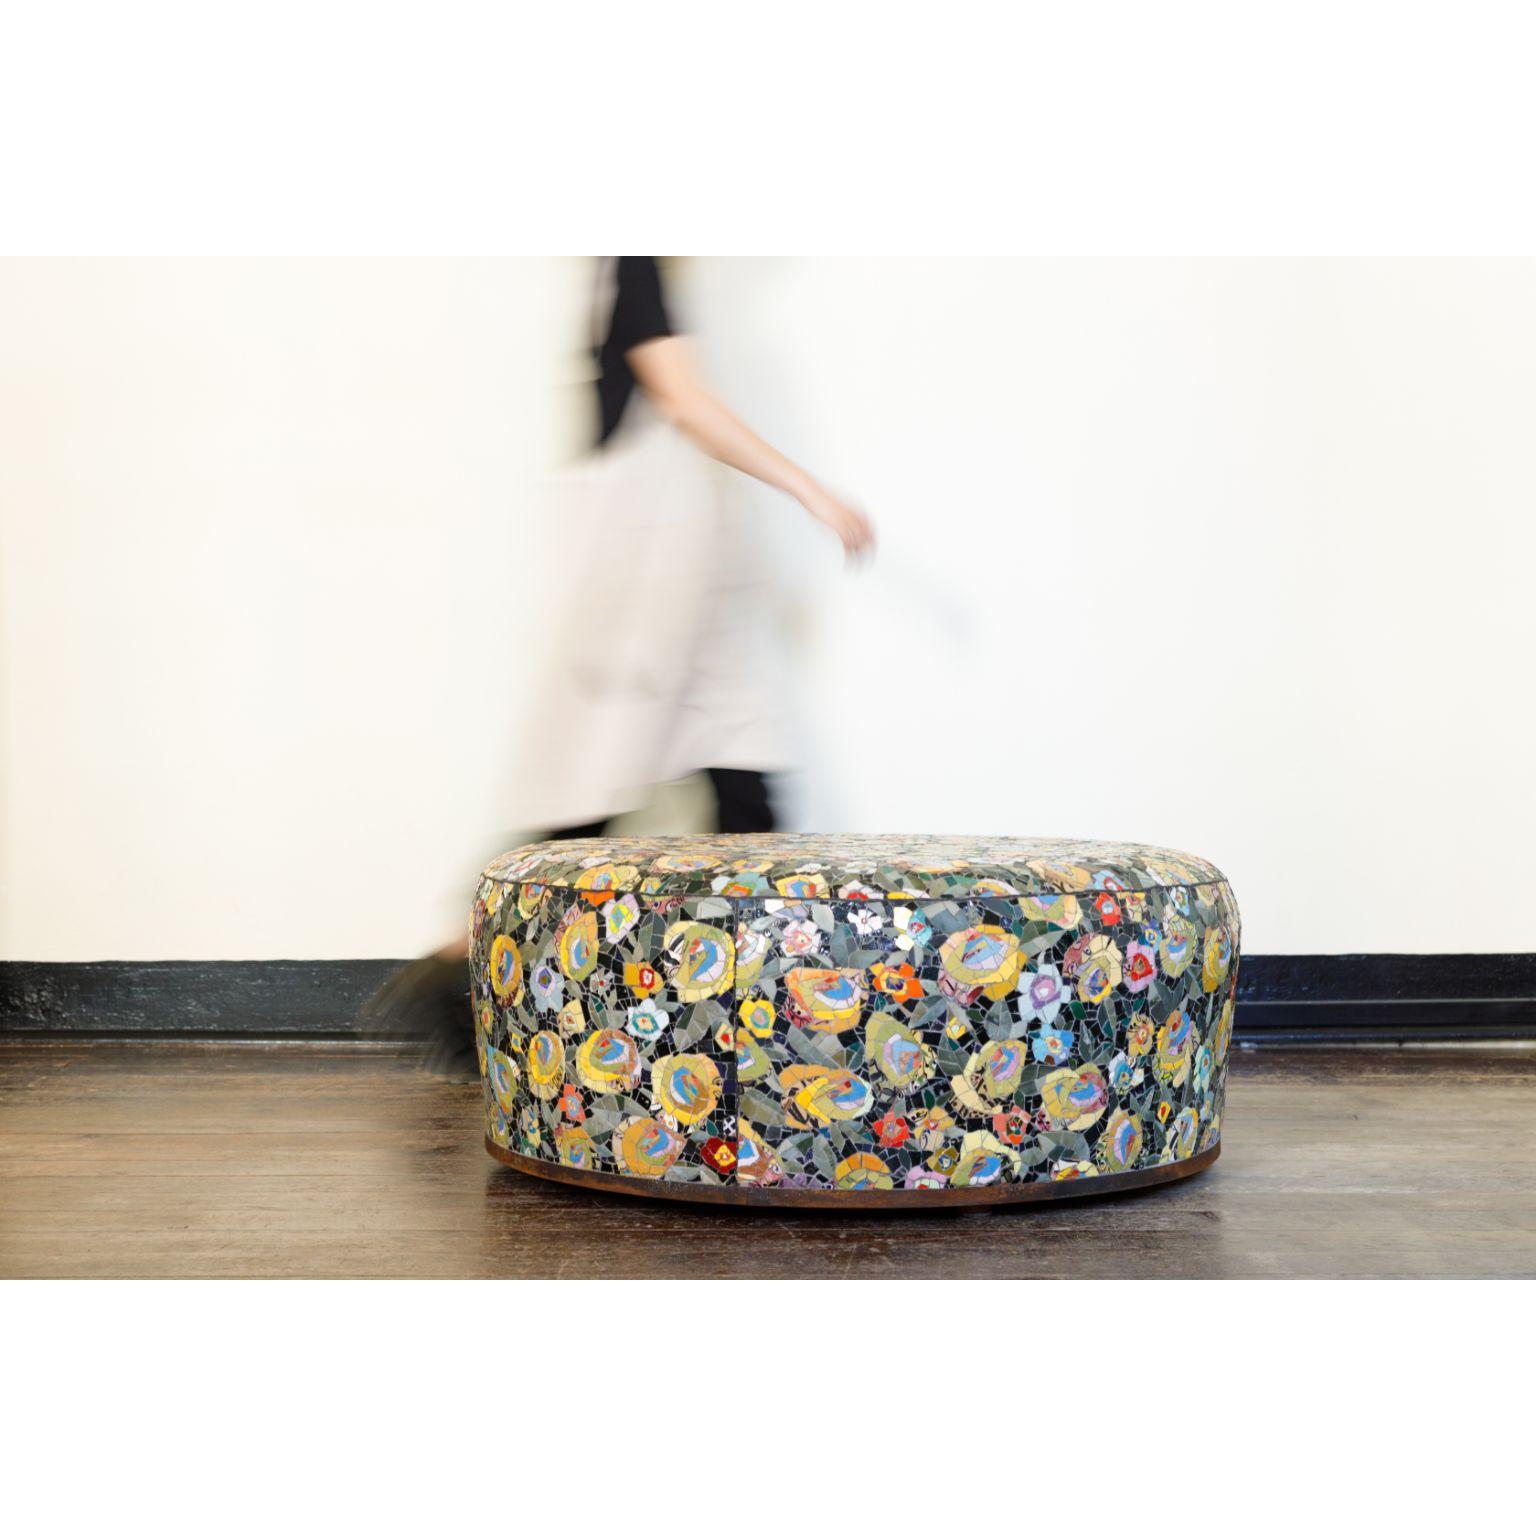 Pouf Floreale by Yukiko Nagai
Dimensions: D100 x W100 x H40 cm
Material: Venetian color glasses, Natural stones, Antique ceramic tiles, Marble
(Nero Belgio, etc) Iron base, Structure with polystyrene-glass resin, Cement, Stucco.
Weight: 65 kg